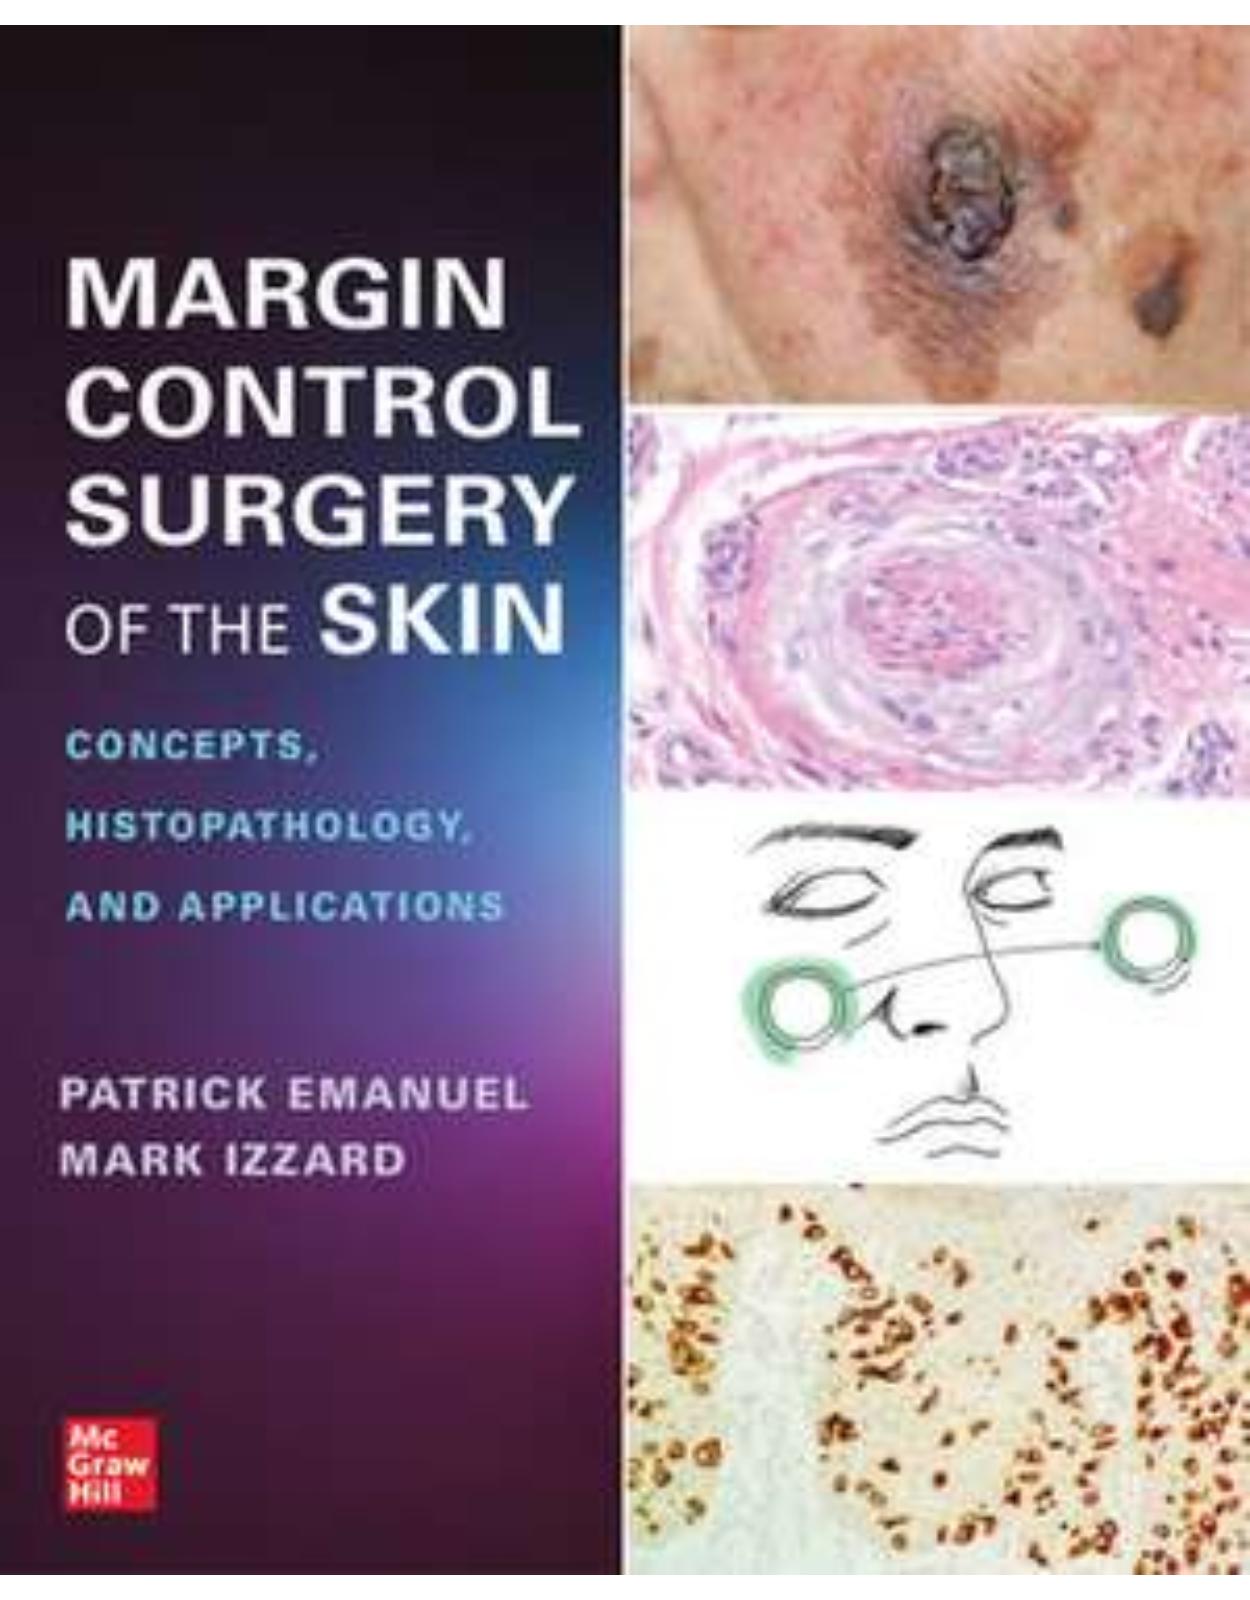 Margin Control Surgery of the Skin